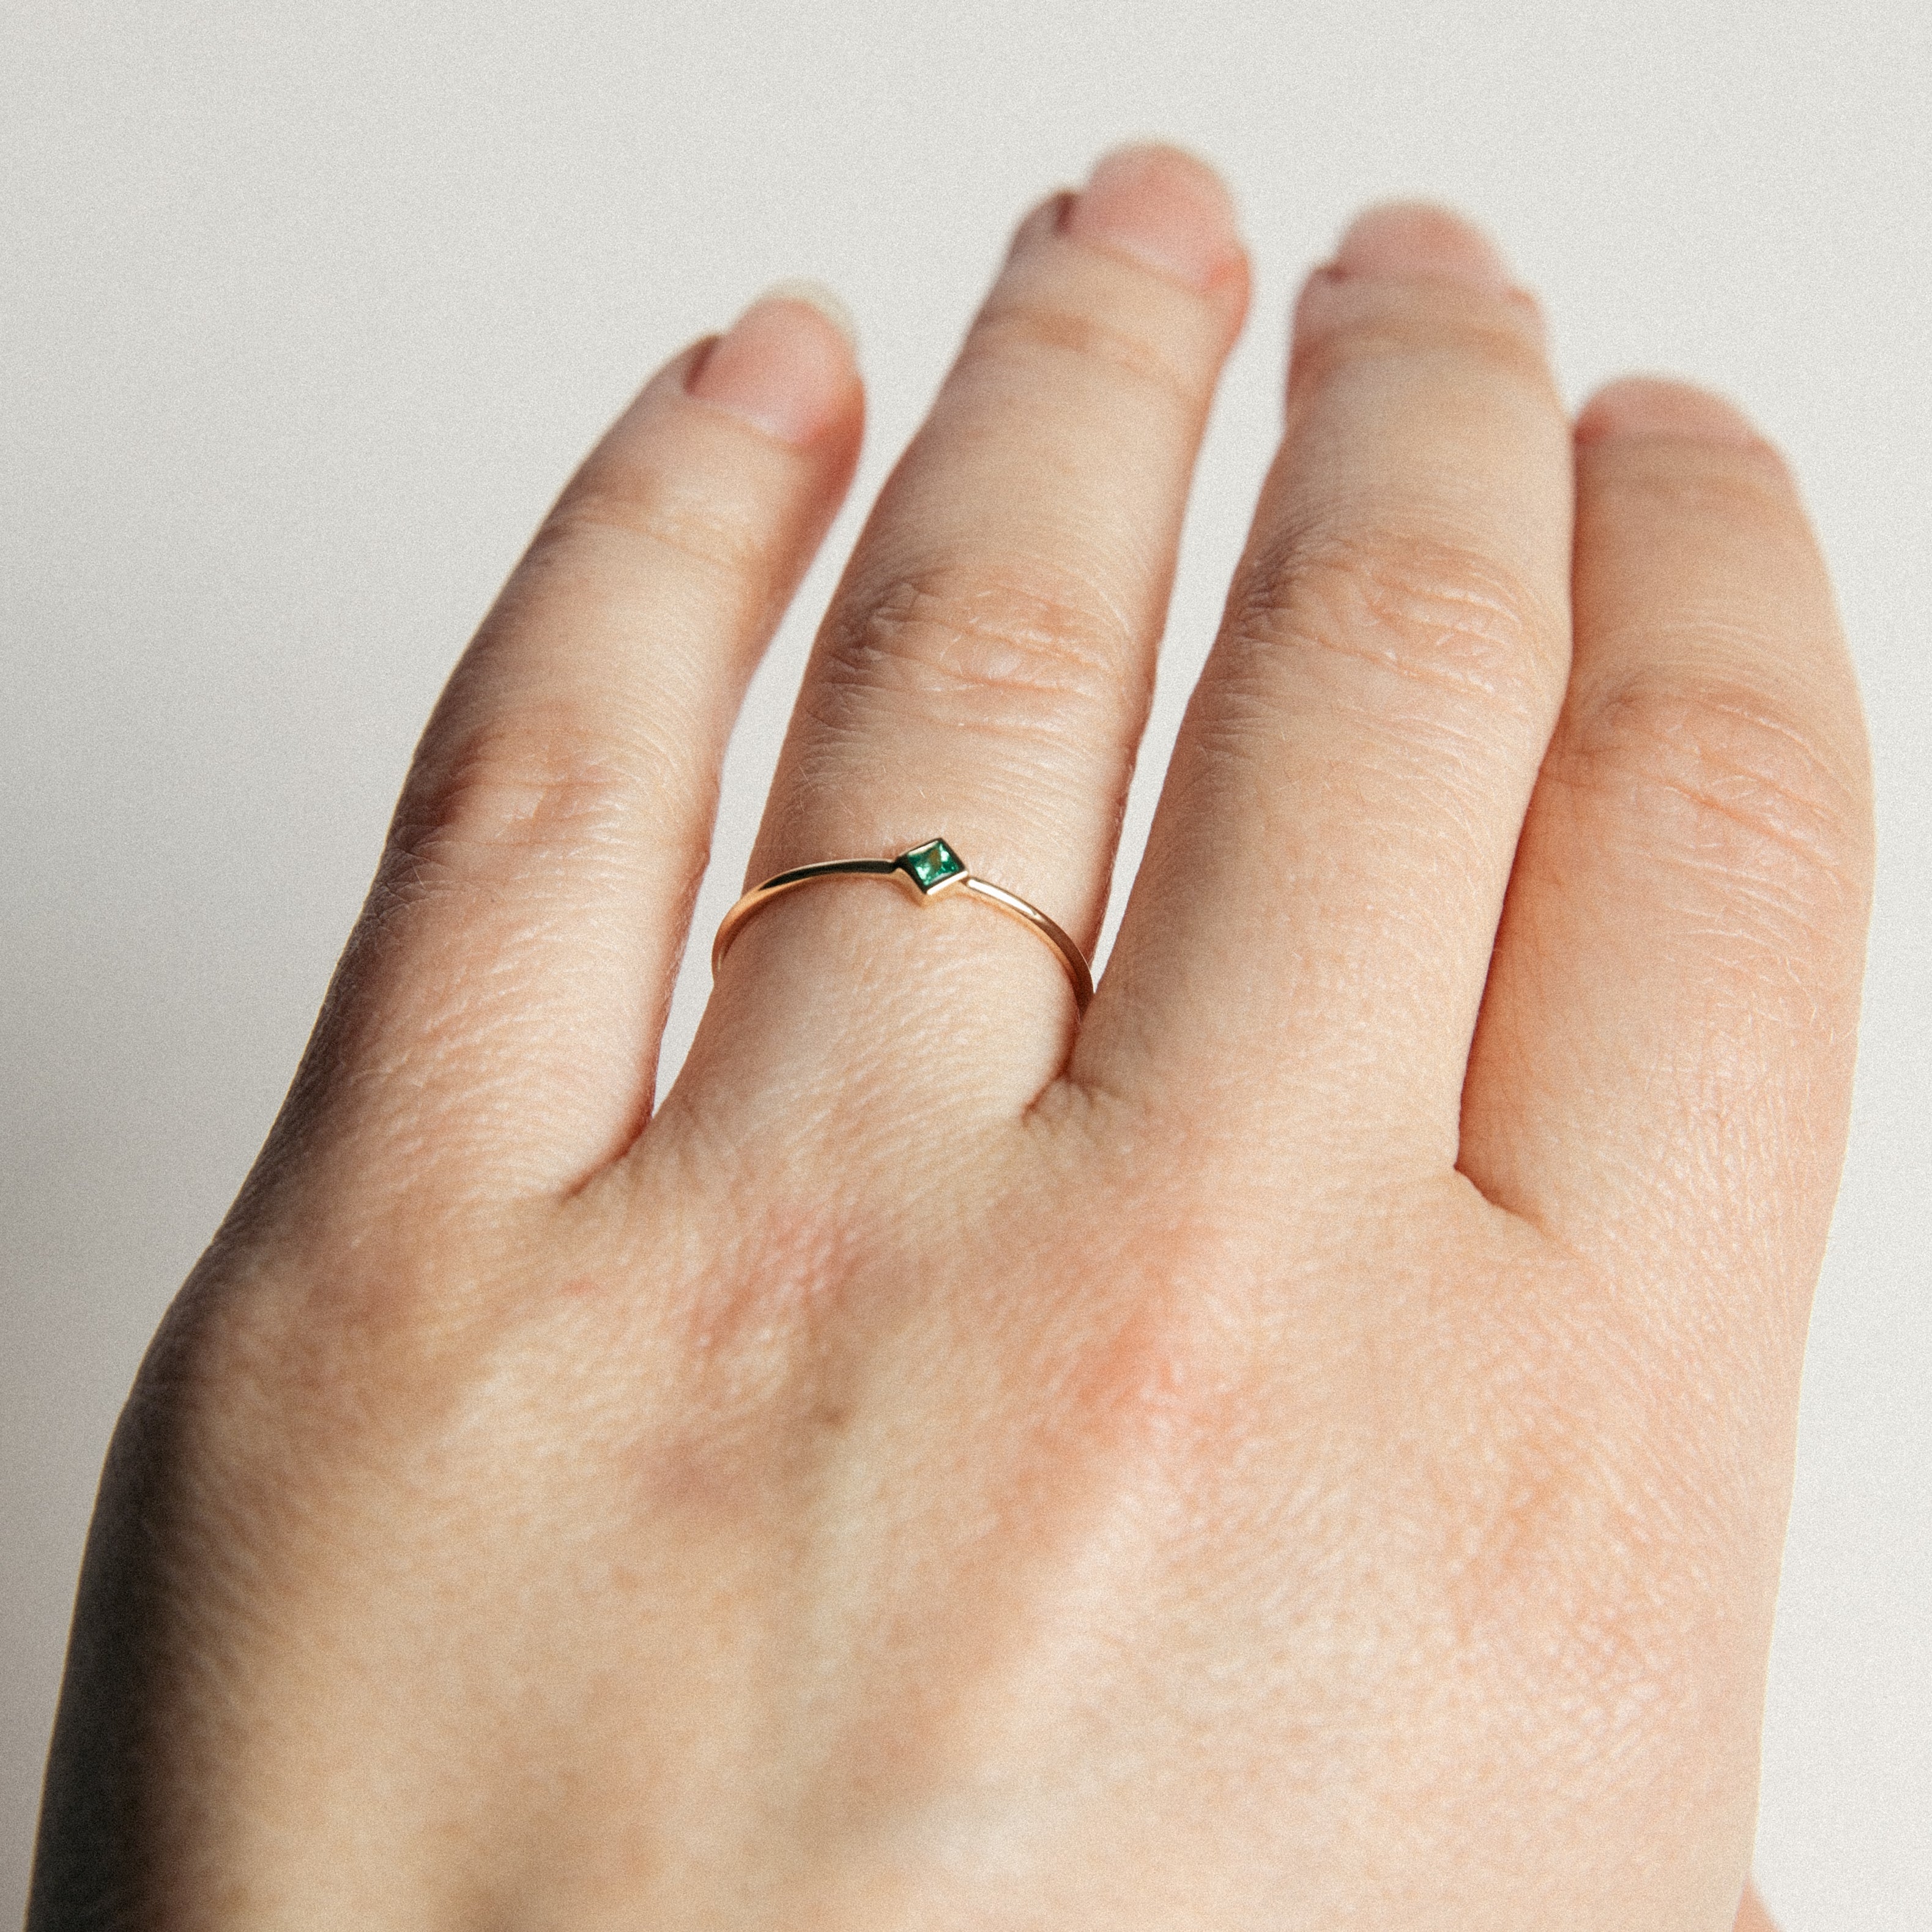 Small Ona Plain Ring in 14k Gold set with Emeralds by SHW Fine Jewelry